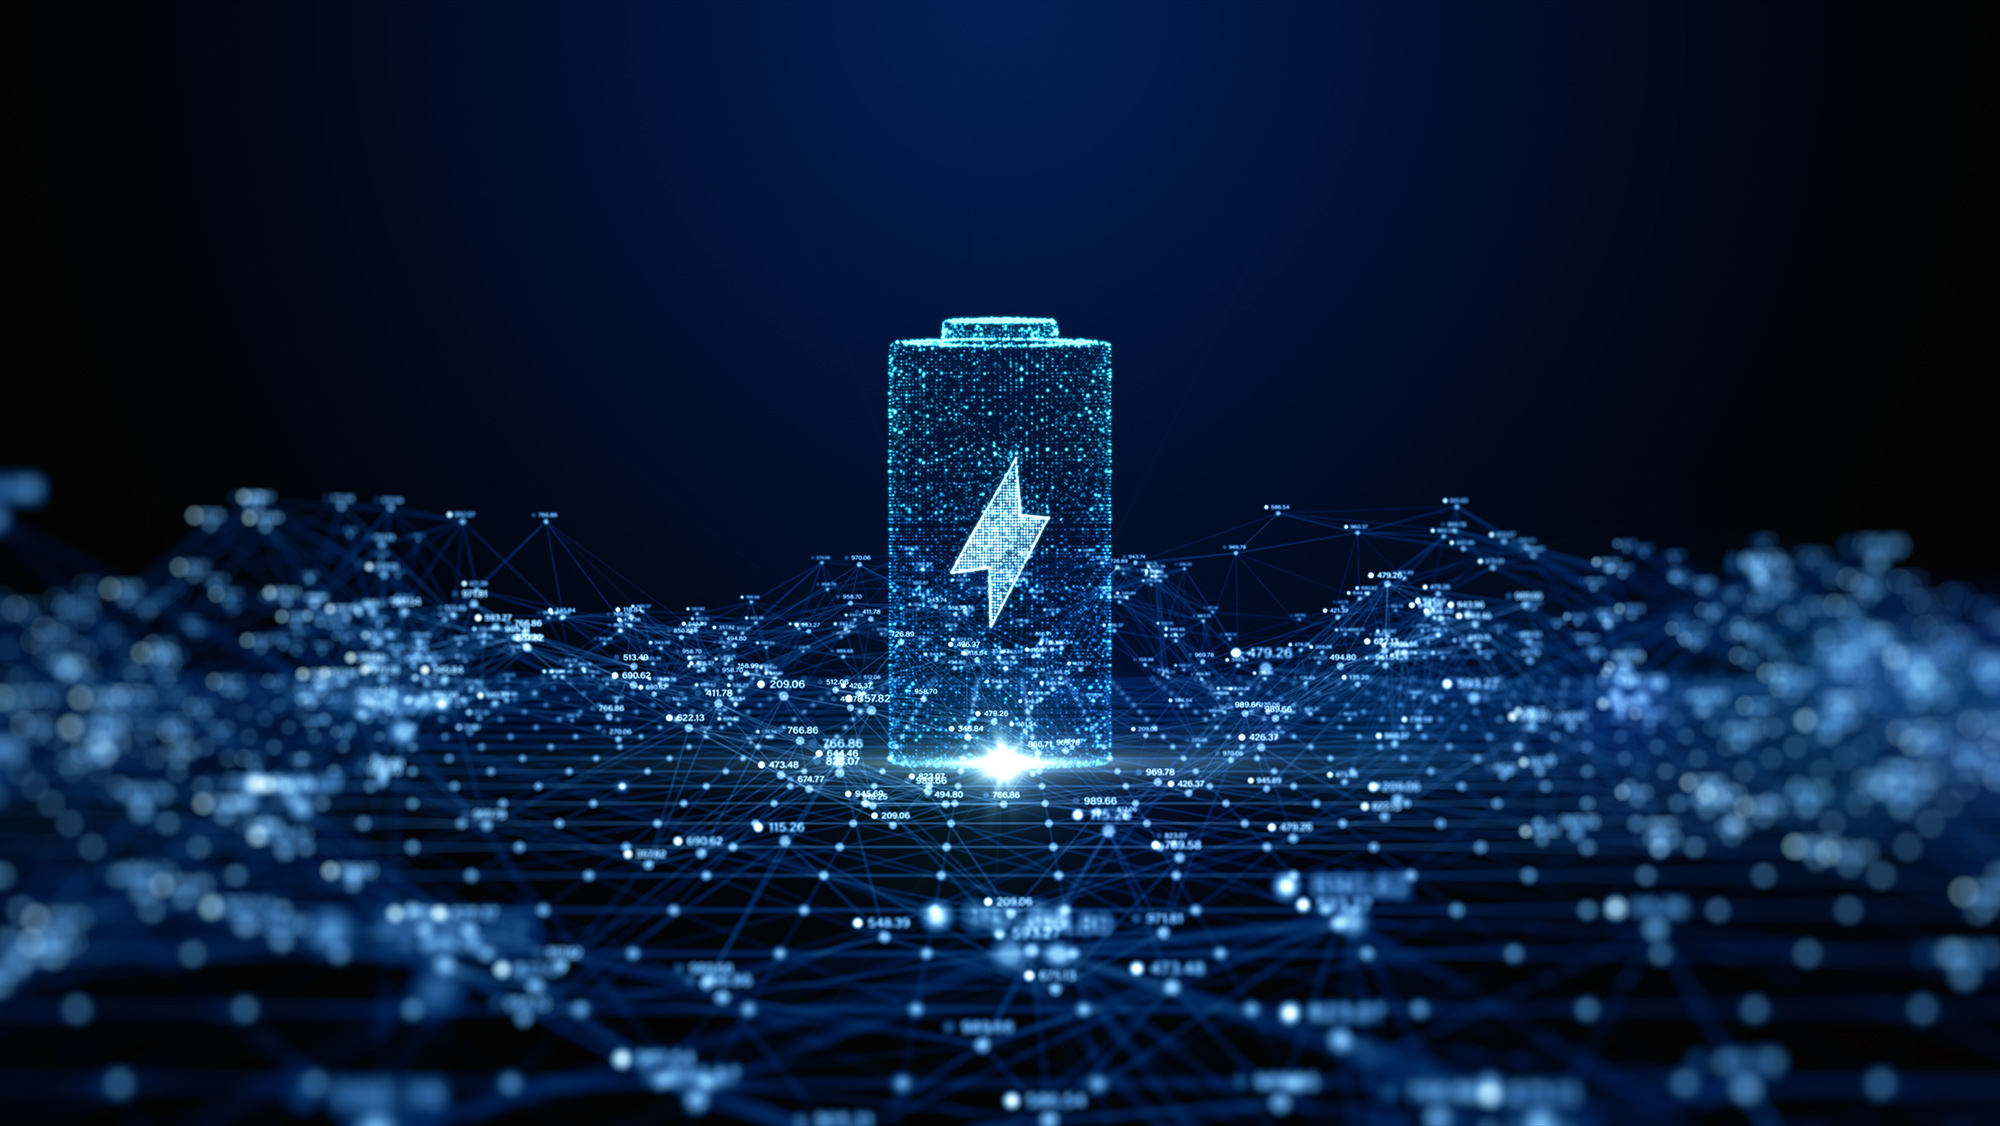 A 3D digital representation of a battery icon illuminated in blue, surrounded by a network of interconnected points and lines against a dark background, symbolizing energy and technology.